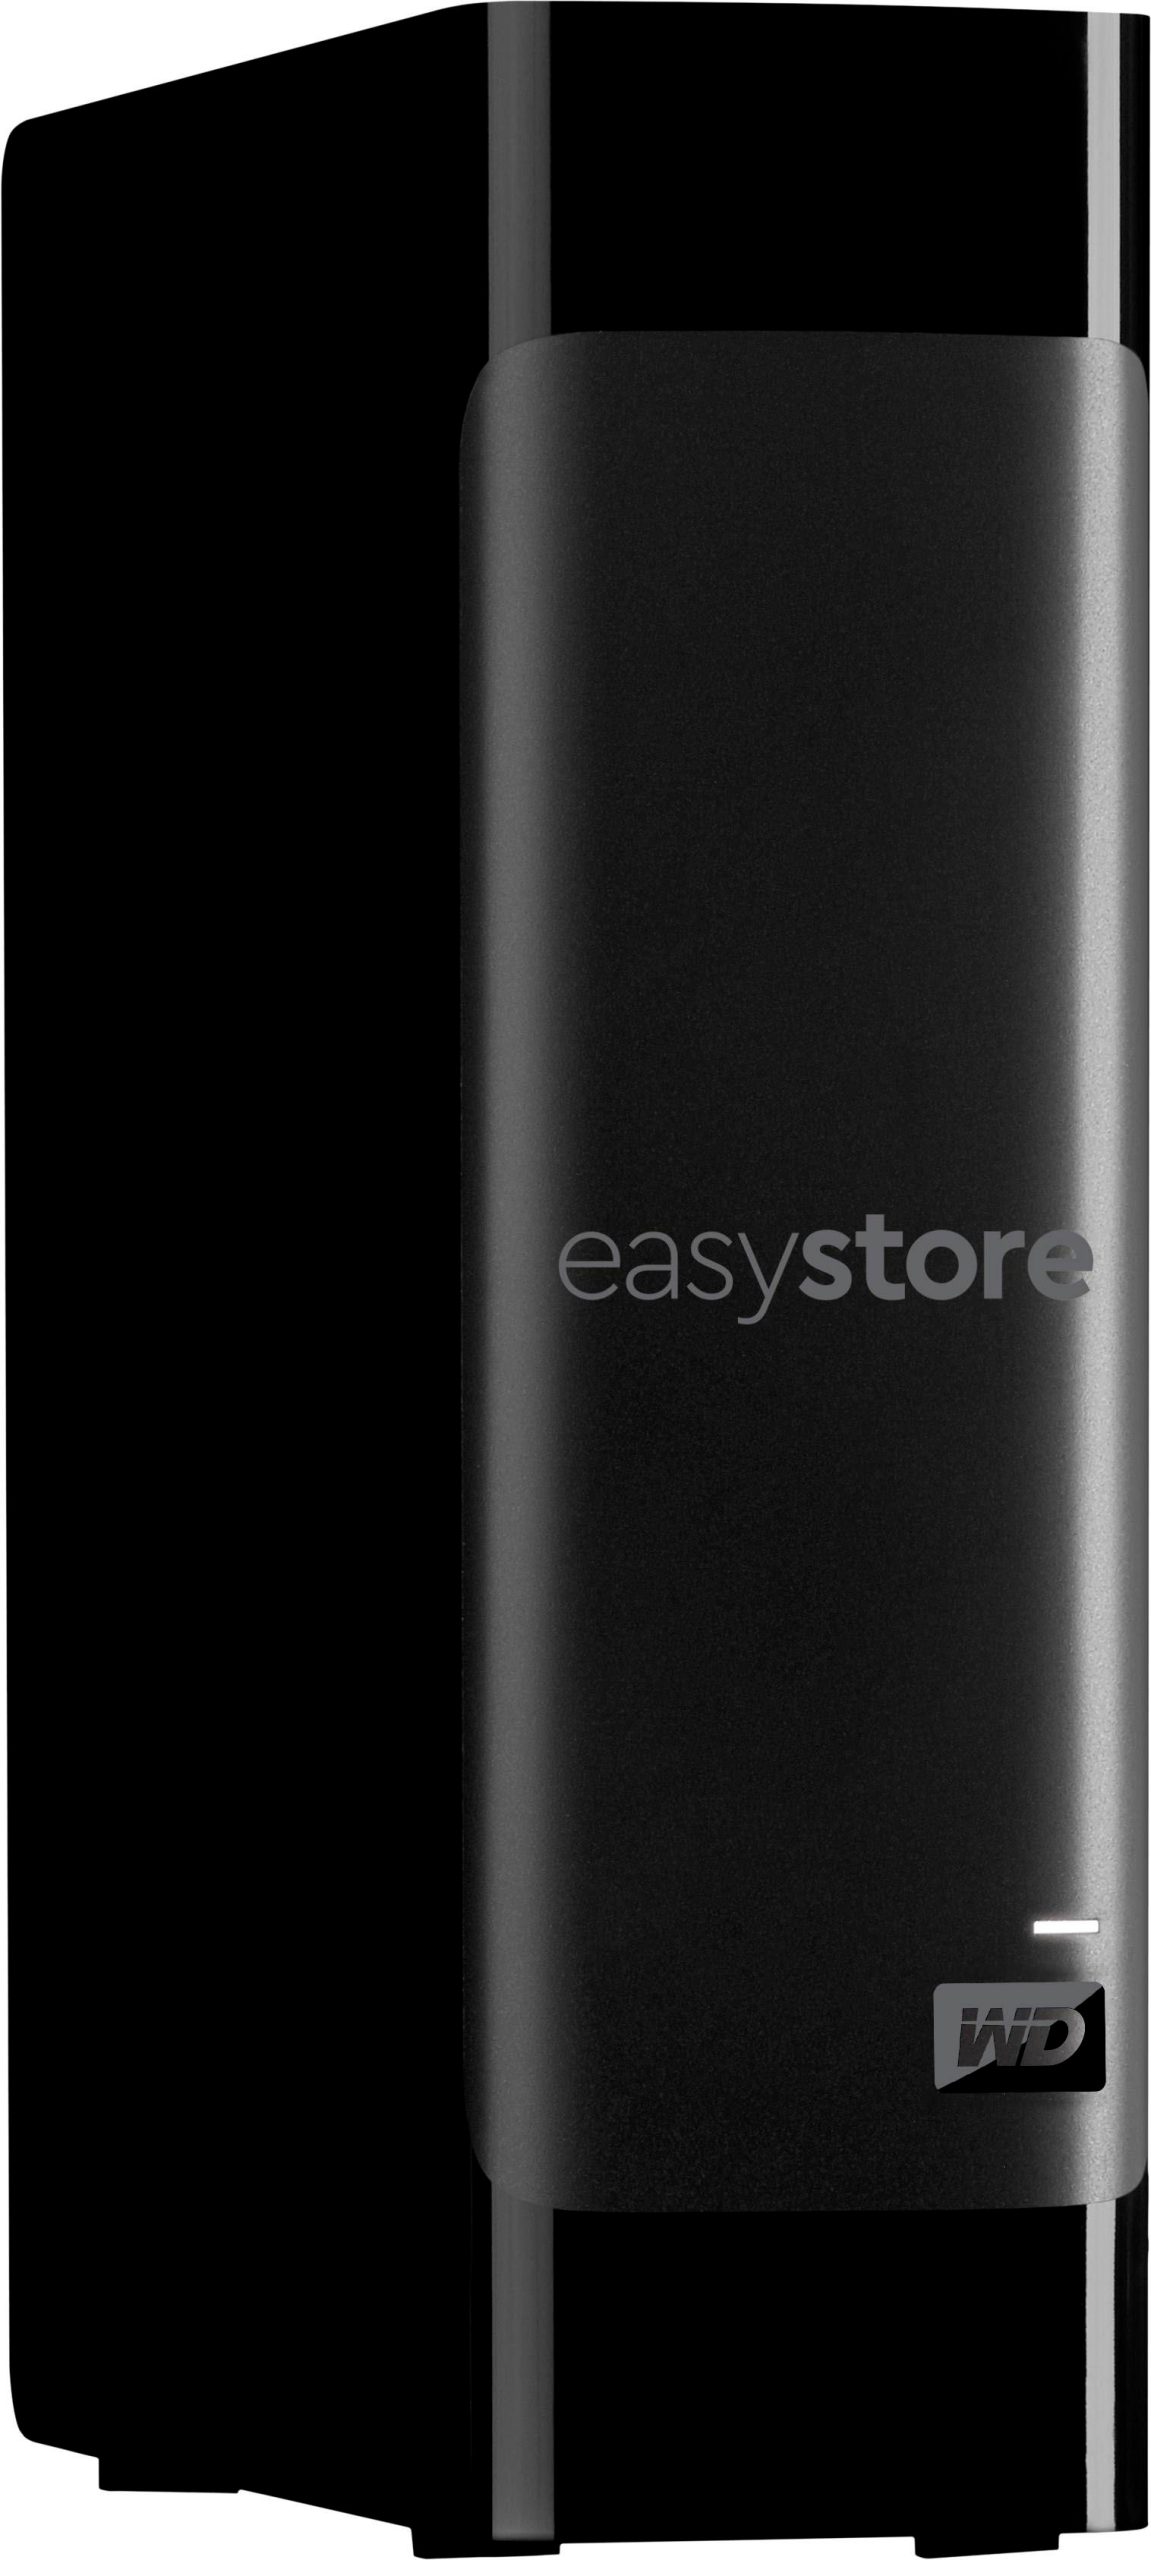 WD – easystore 14TB External USB 3.0 Hard Drive – Black – Just $229.99 at Best Buy